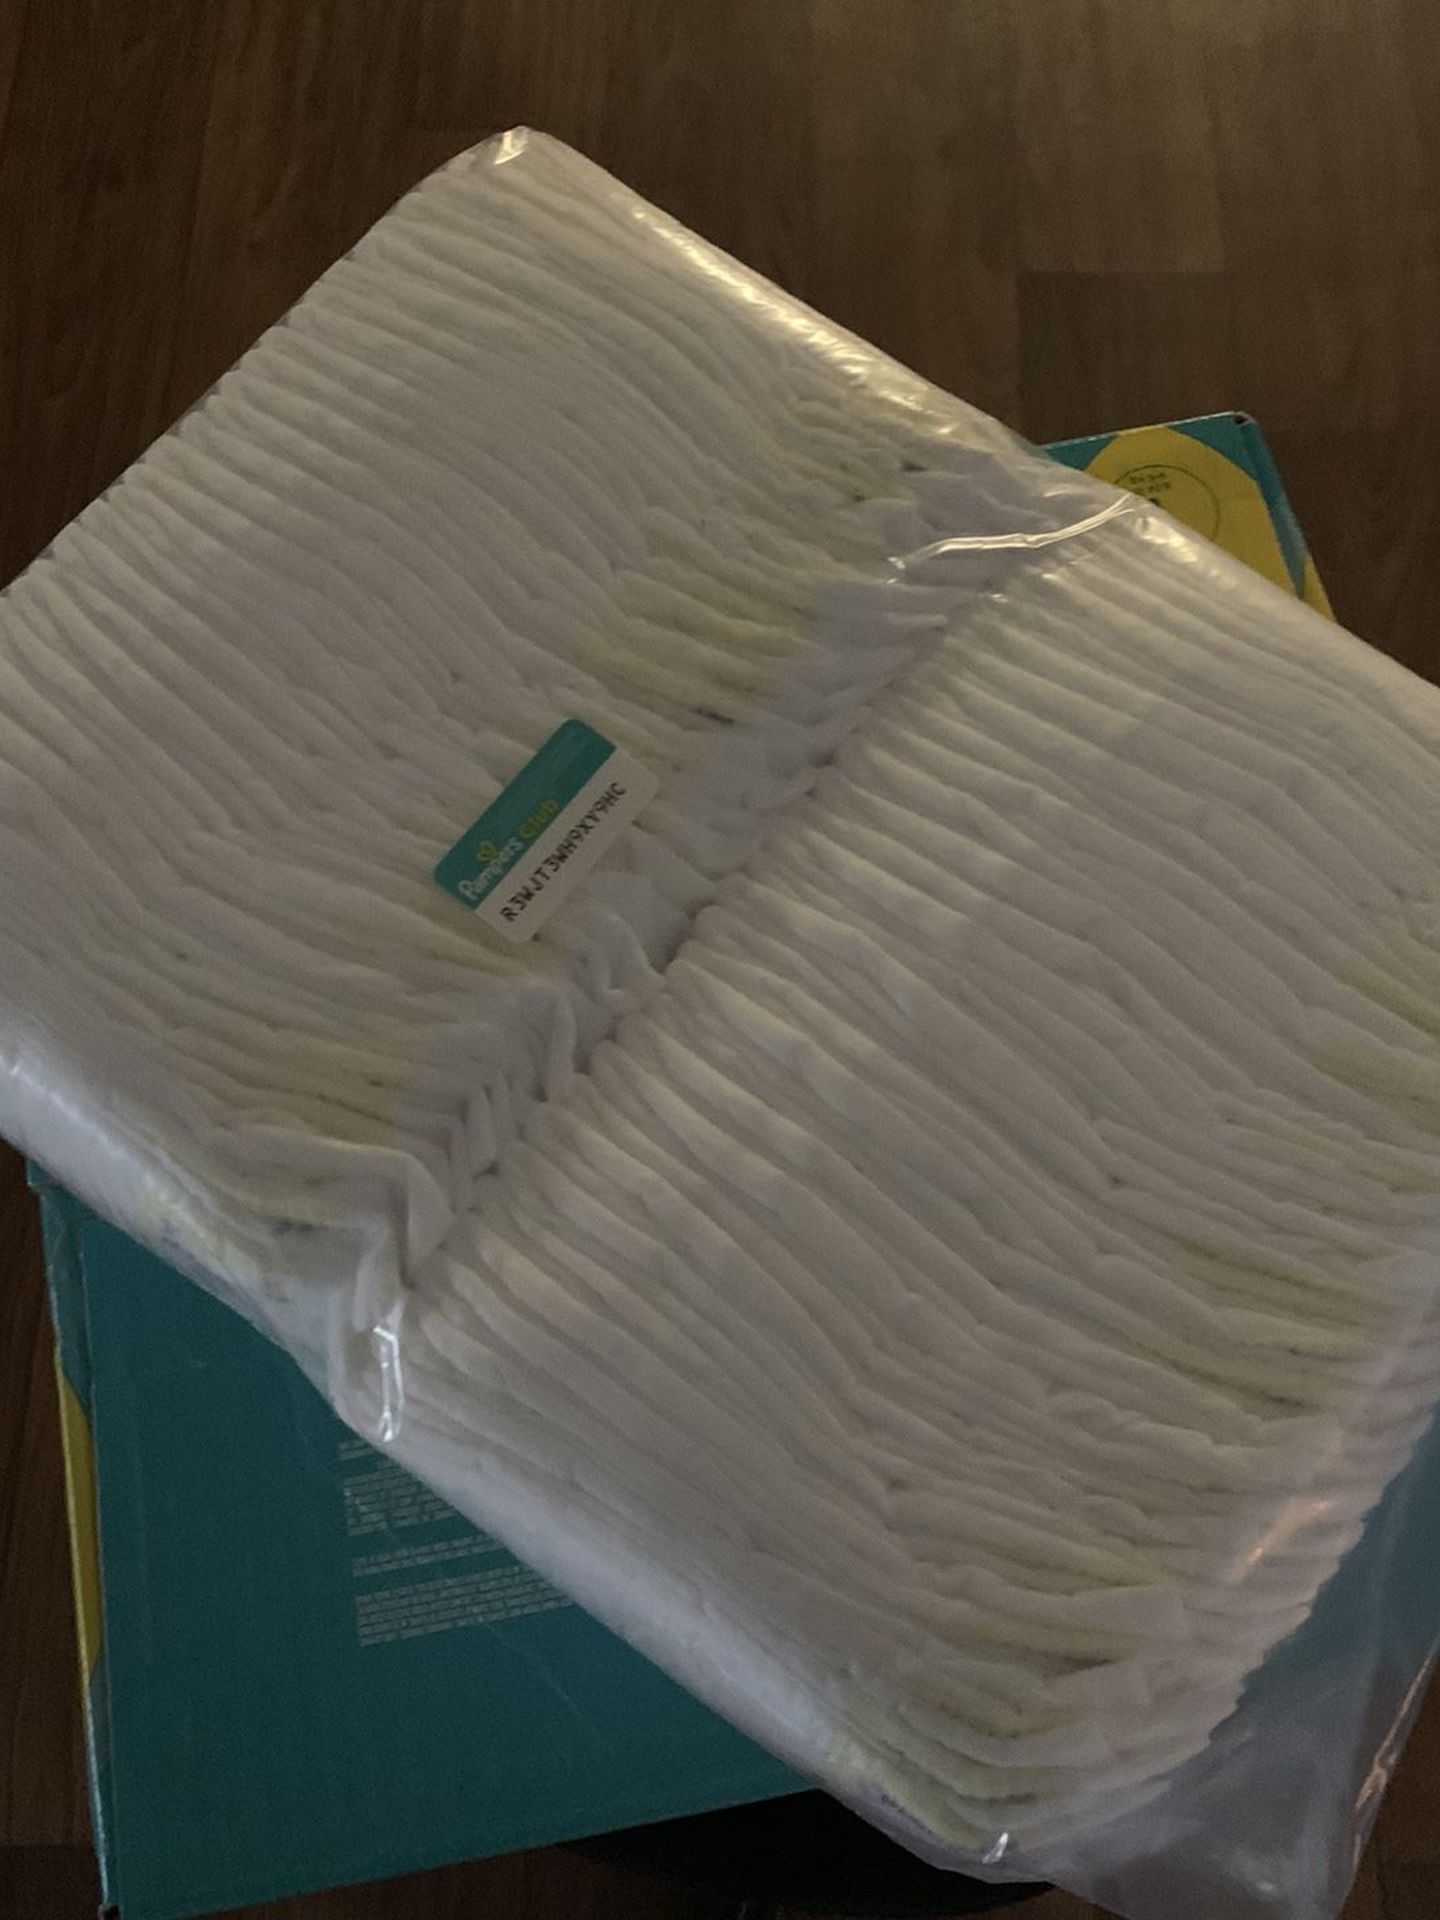 66 Count Size 1 Diapers (Pampers Swaddlers)